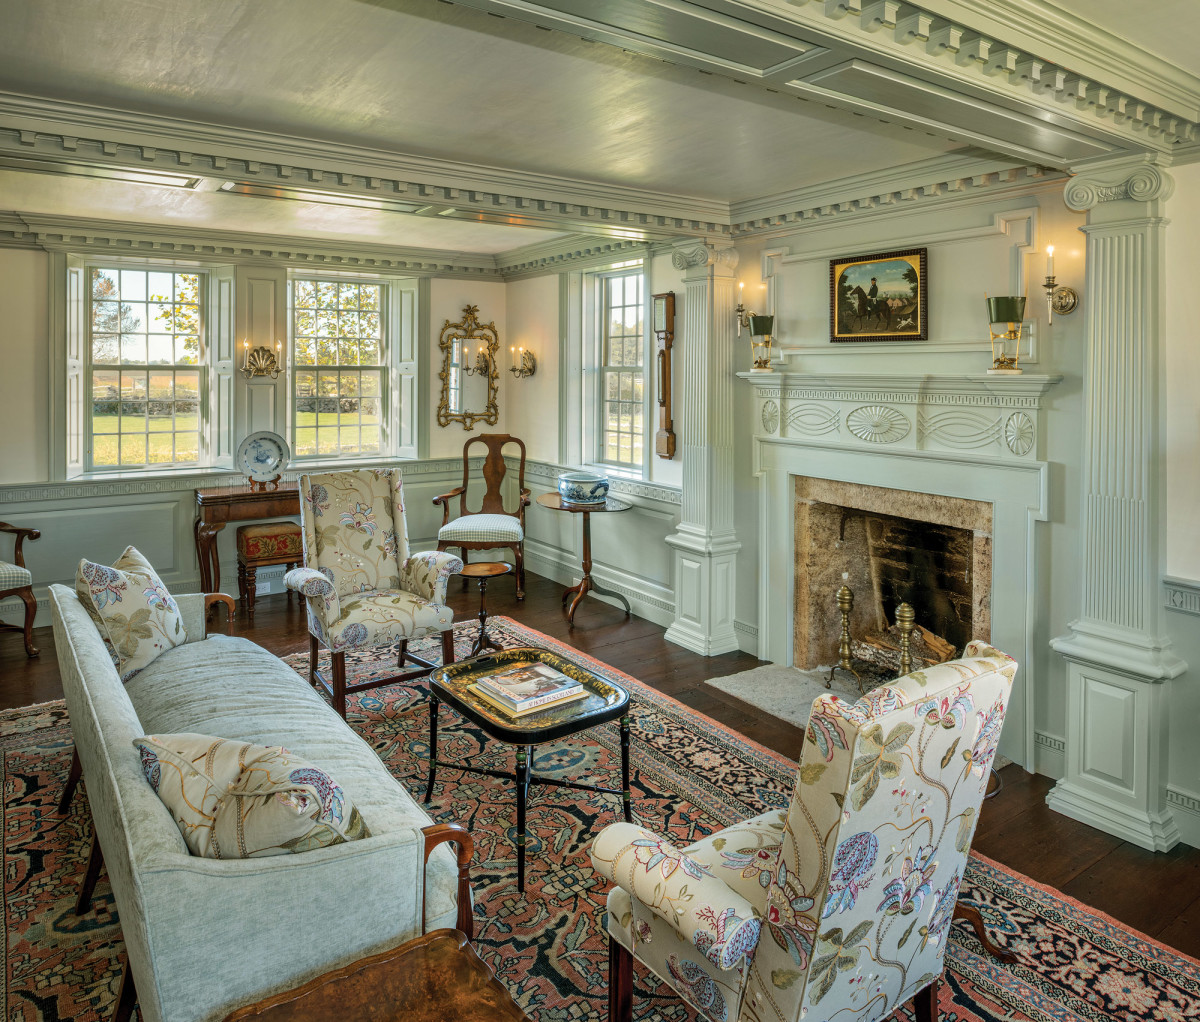 The new parlor in the main house of the Pendleton-Chapman Farm features hand-carved 18th-century-style paneling and decoration.